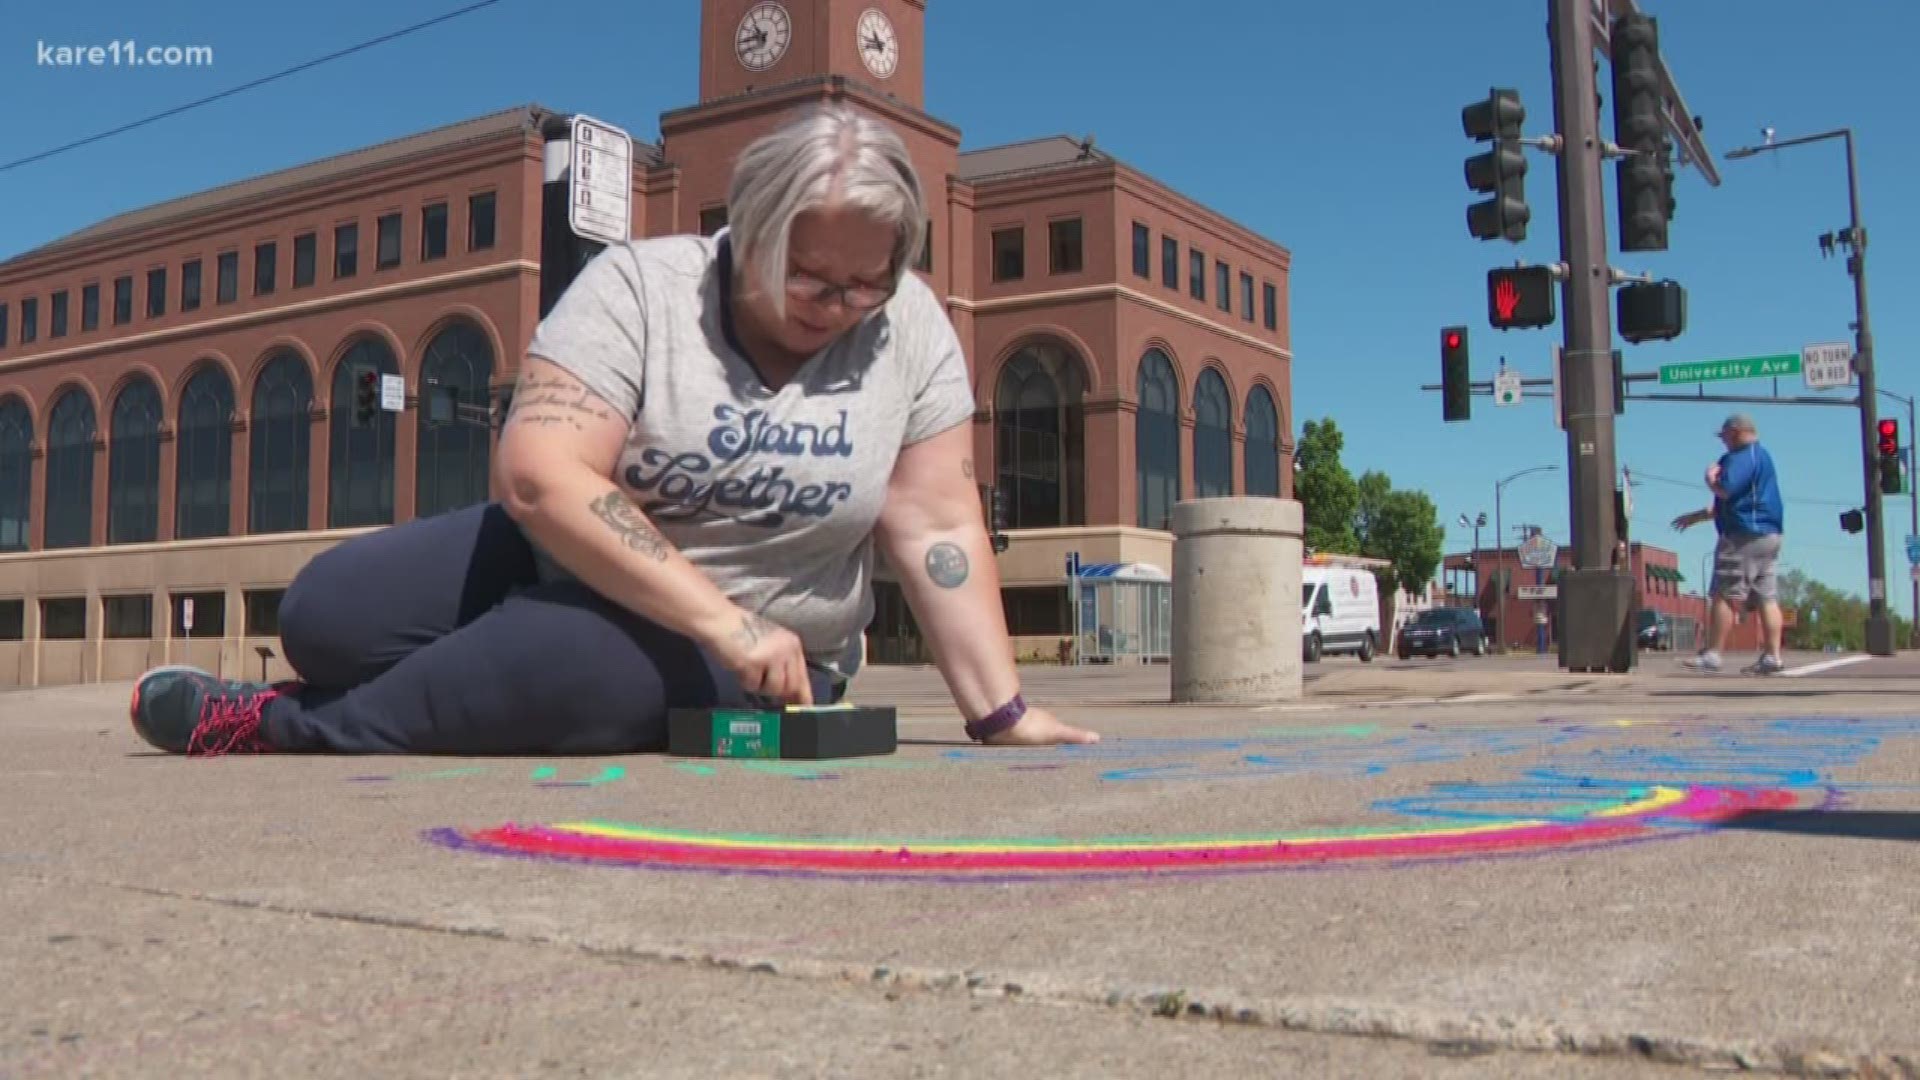 Founder Susan Montgomery leaves notes and chalk art to bring awareness to suicide prevention efforts.